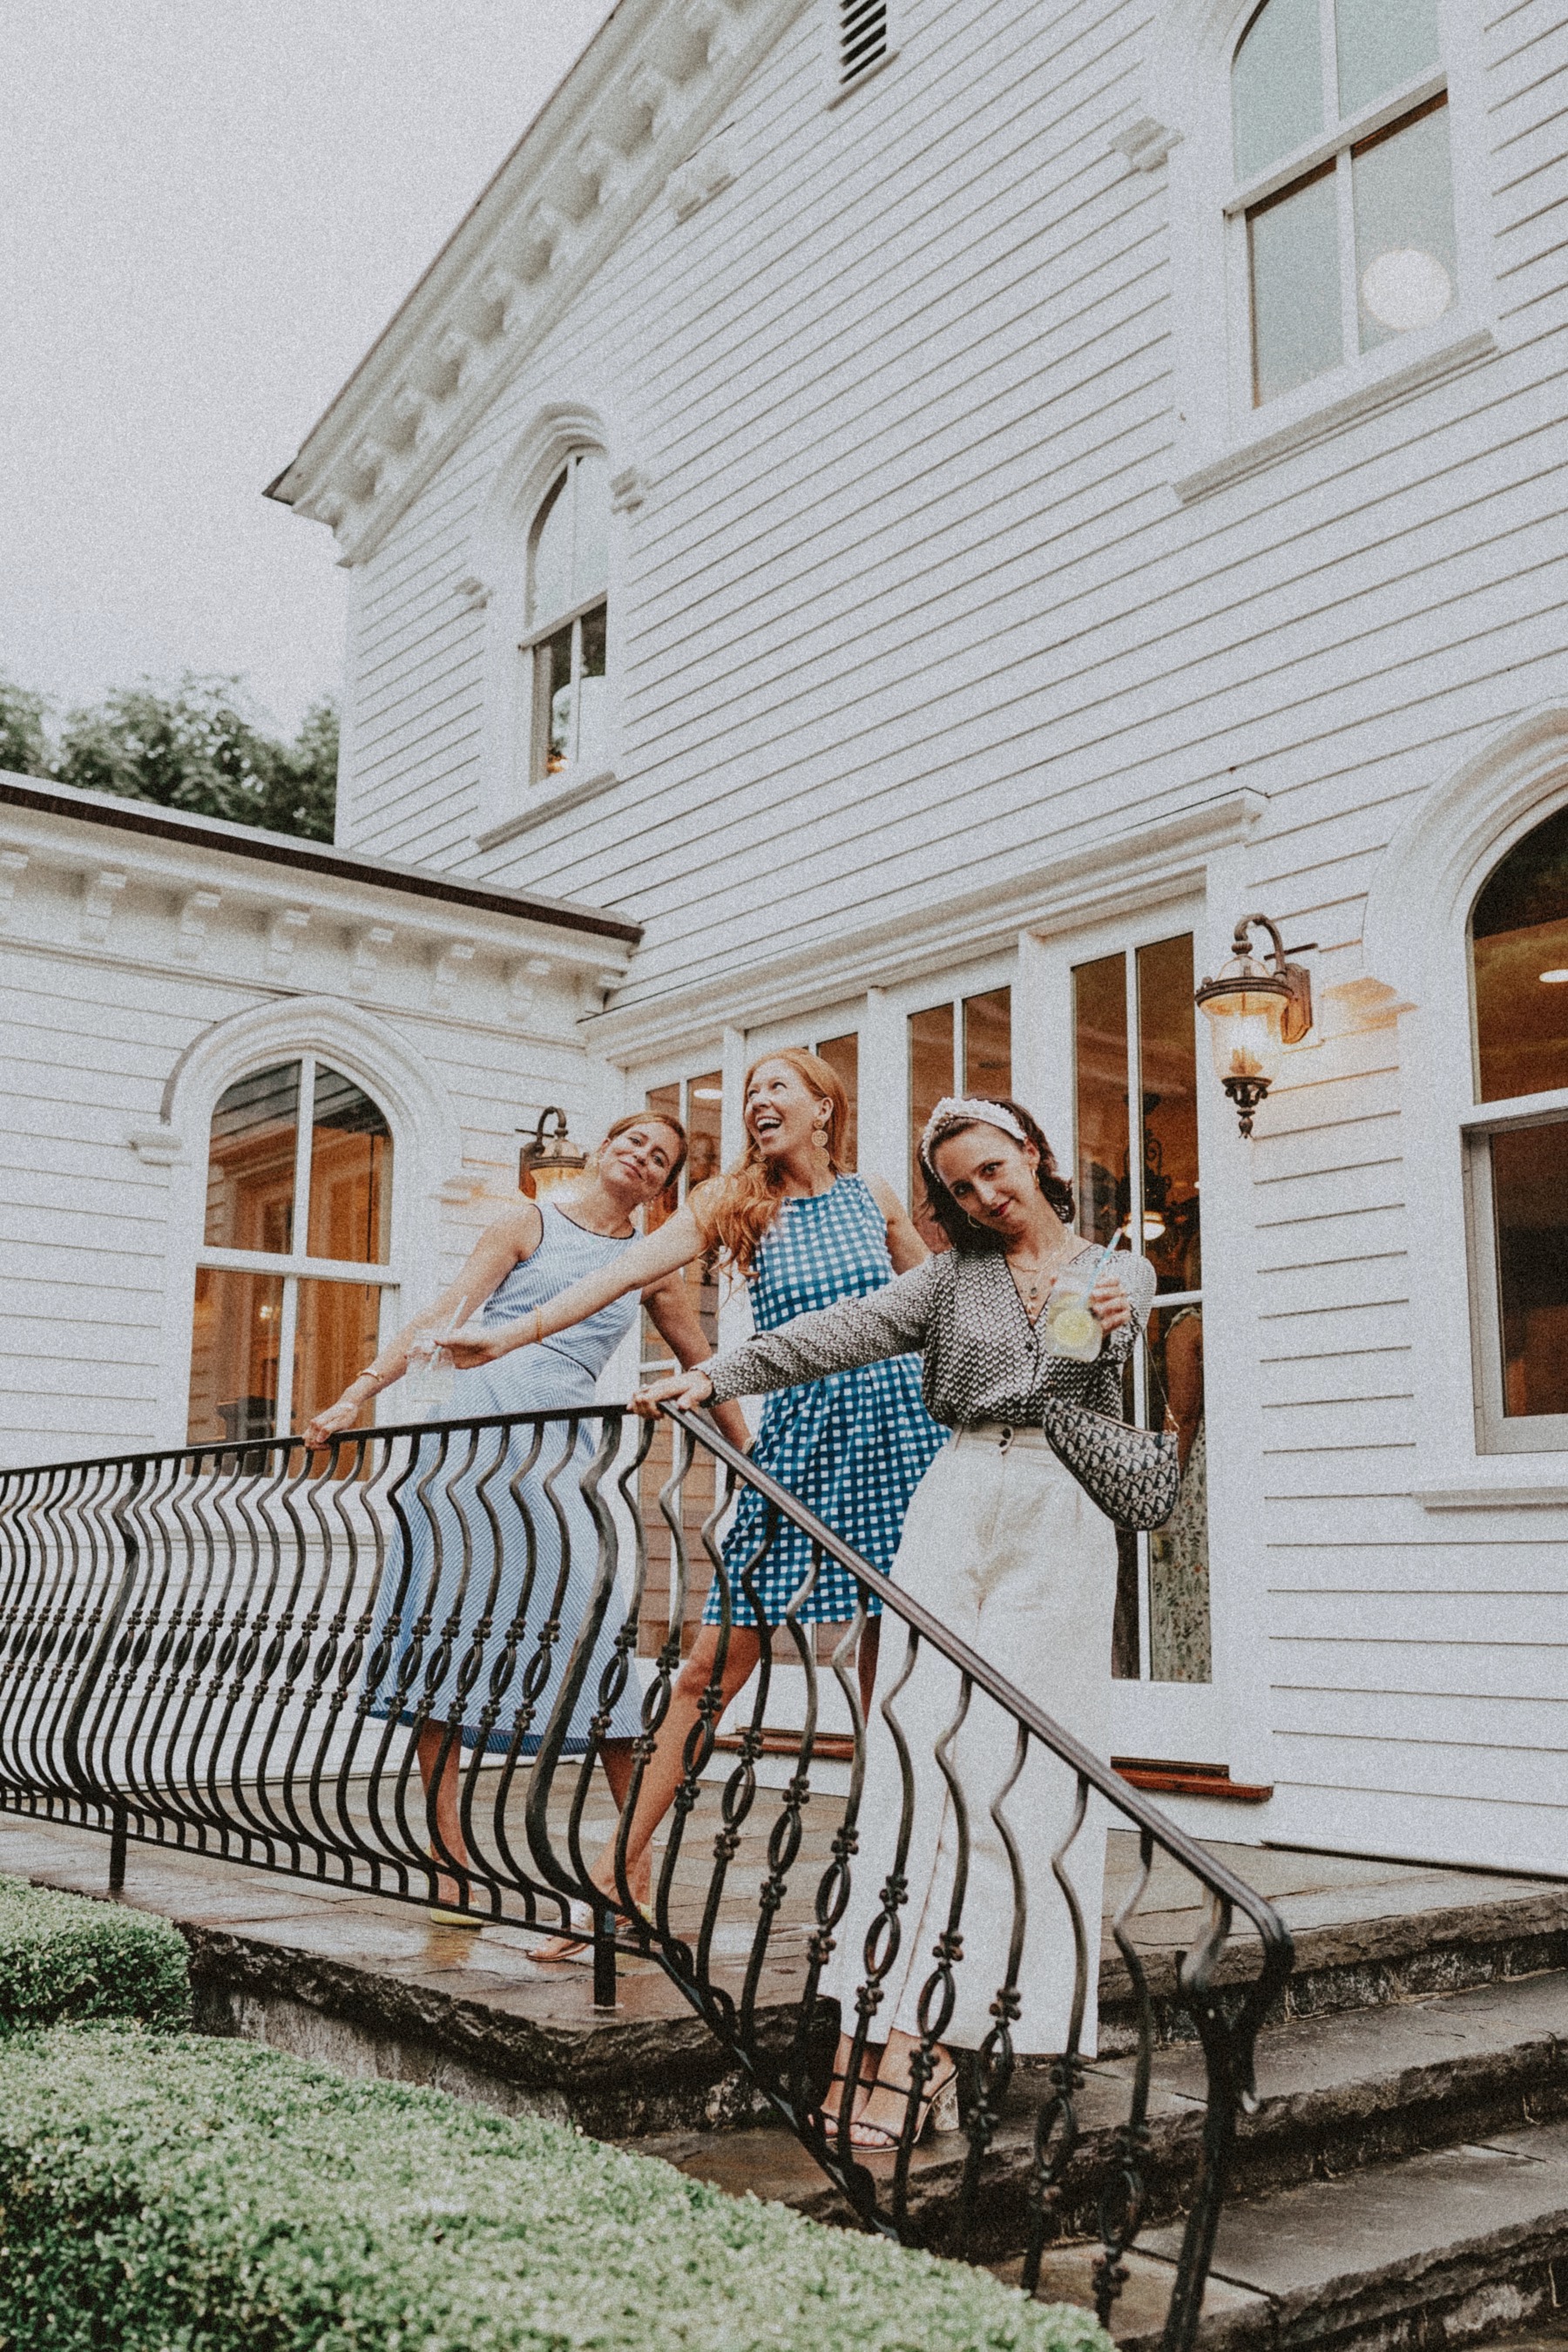 A Summer Soirée With My Favorite Connecticut Bloggers #summer #fashion #style #bloggers #bffs #connecticut #westchester #diorbag #outfitinspiration